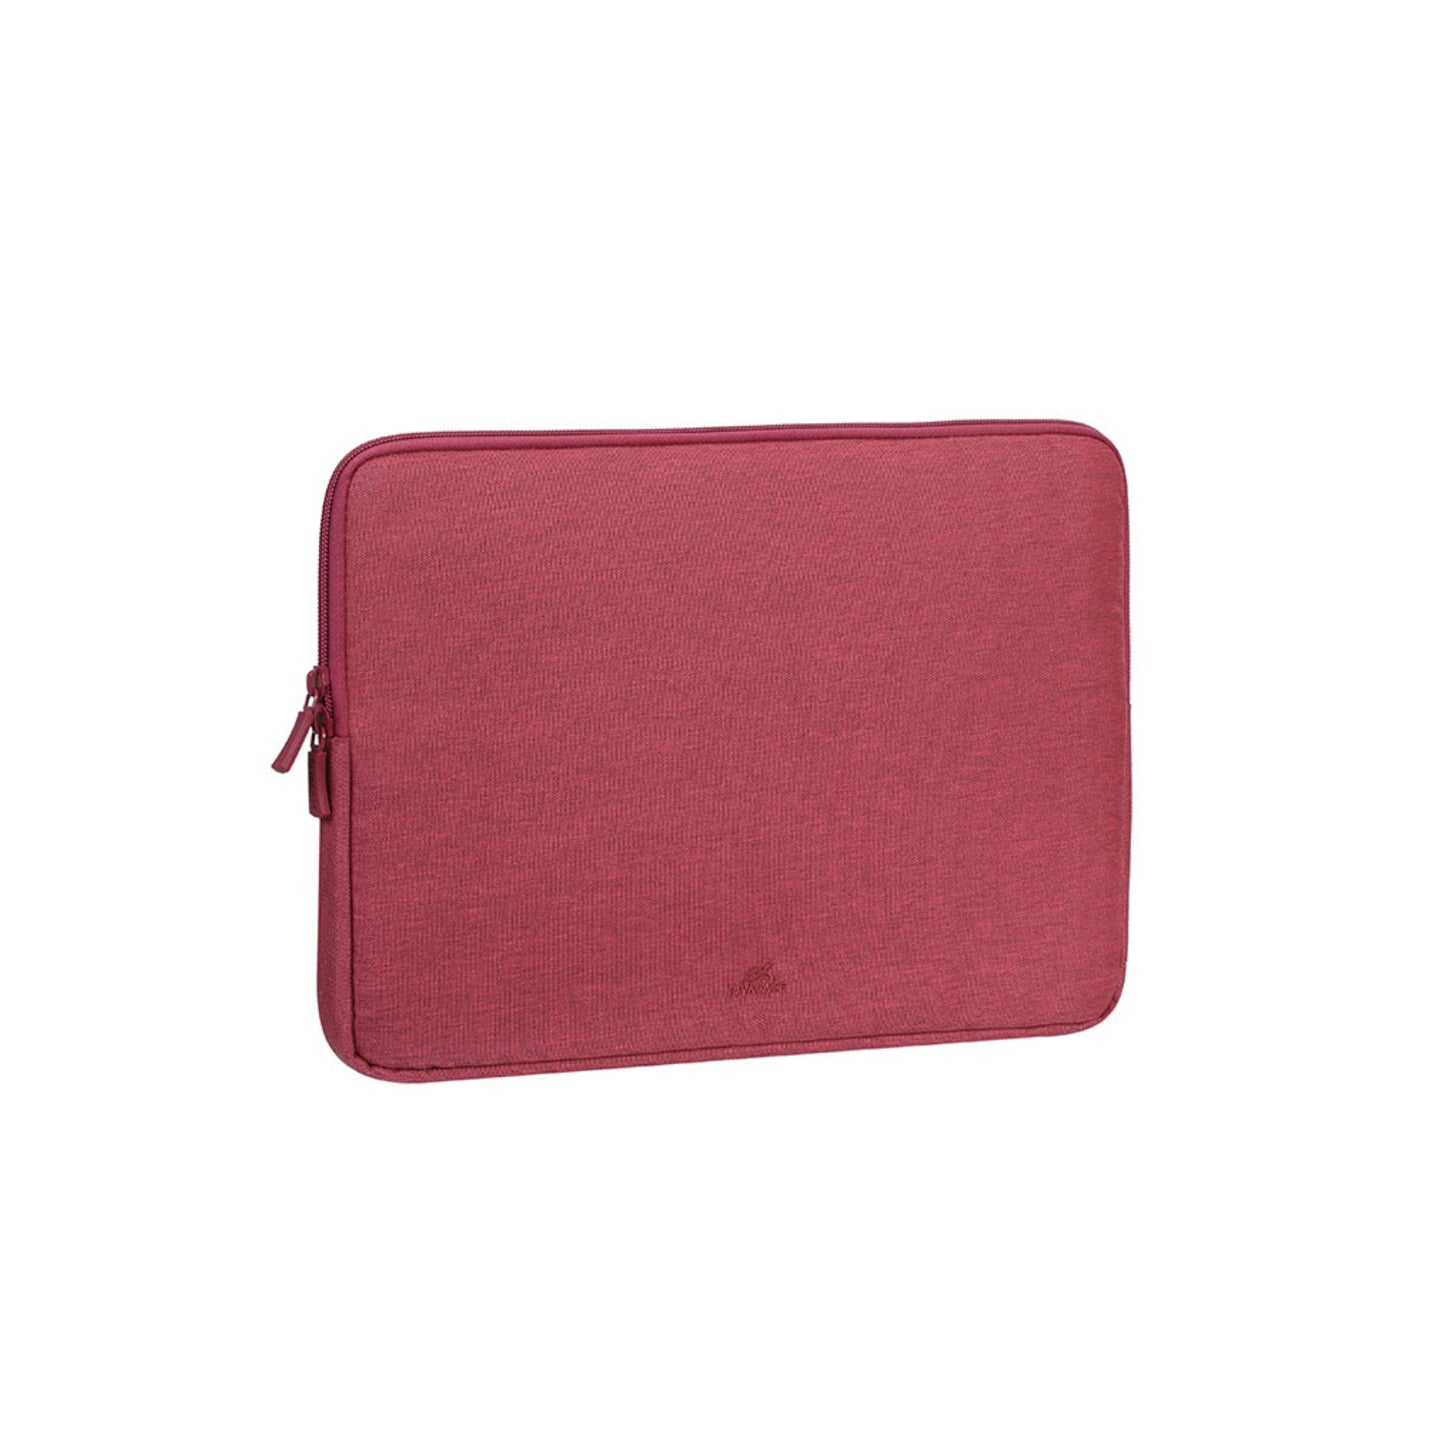 RIVACASE 7703 Laptop Sleeves 14/13 - Red